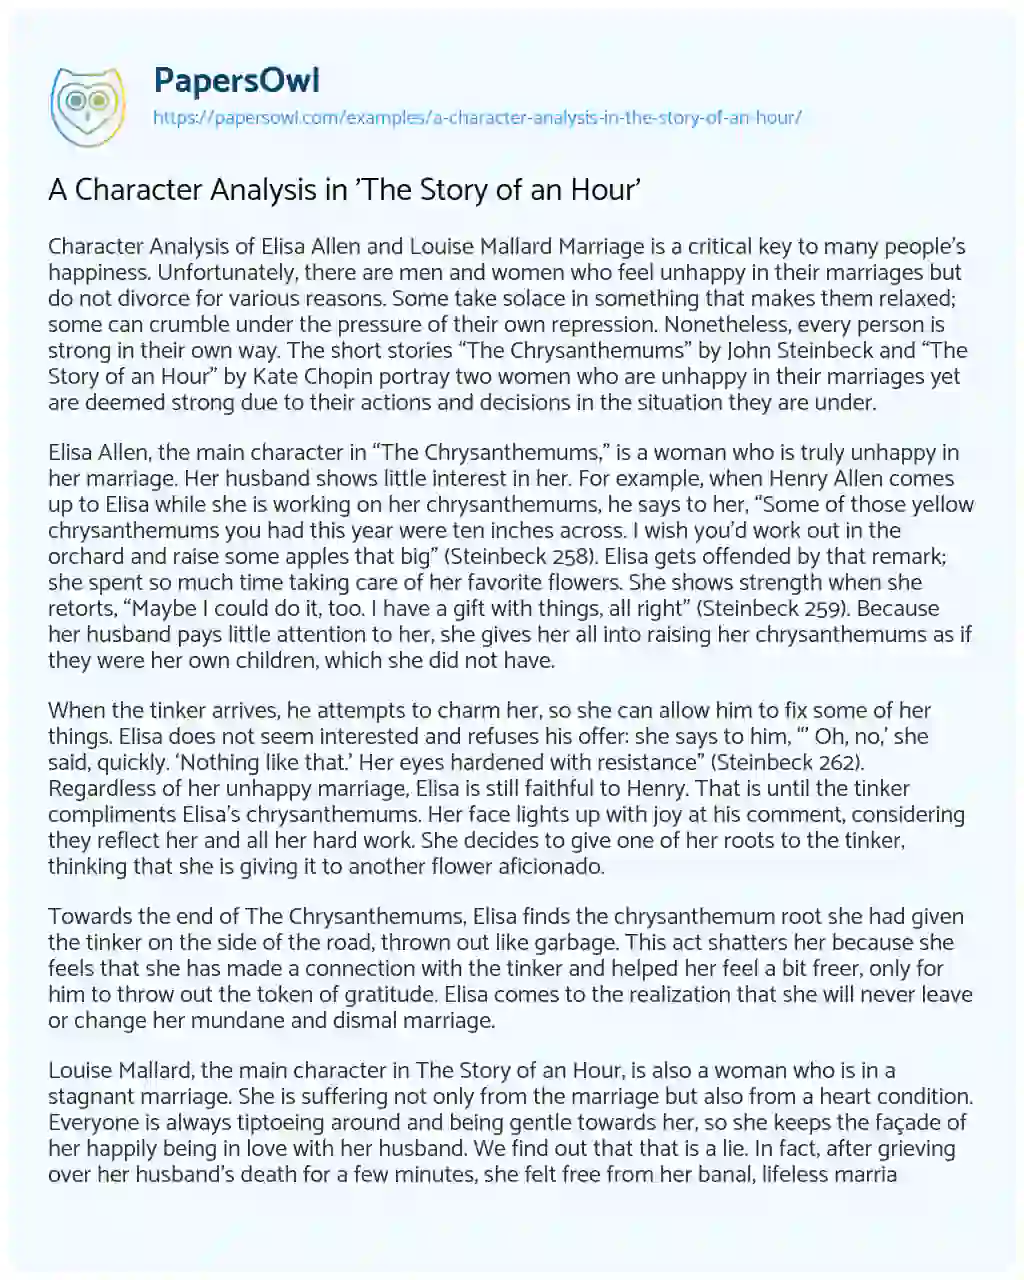 Essay on A Character Analysis in ‘The Story of an Hour’